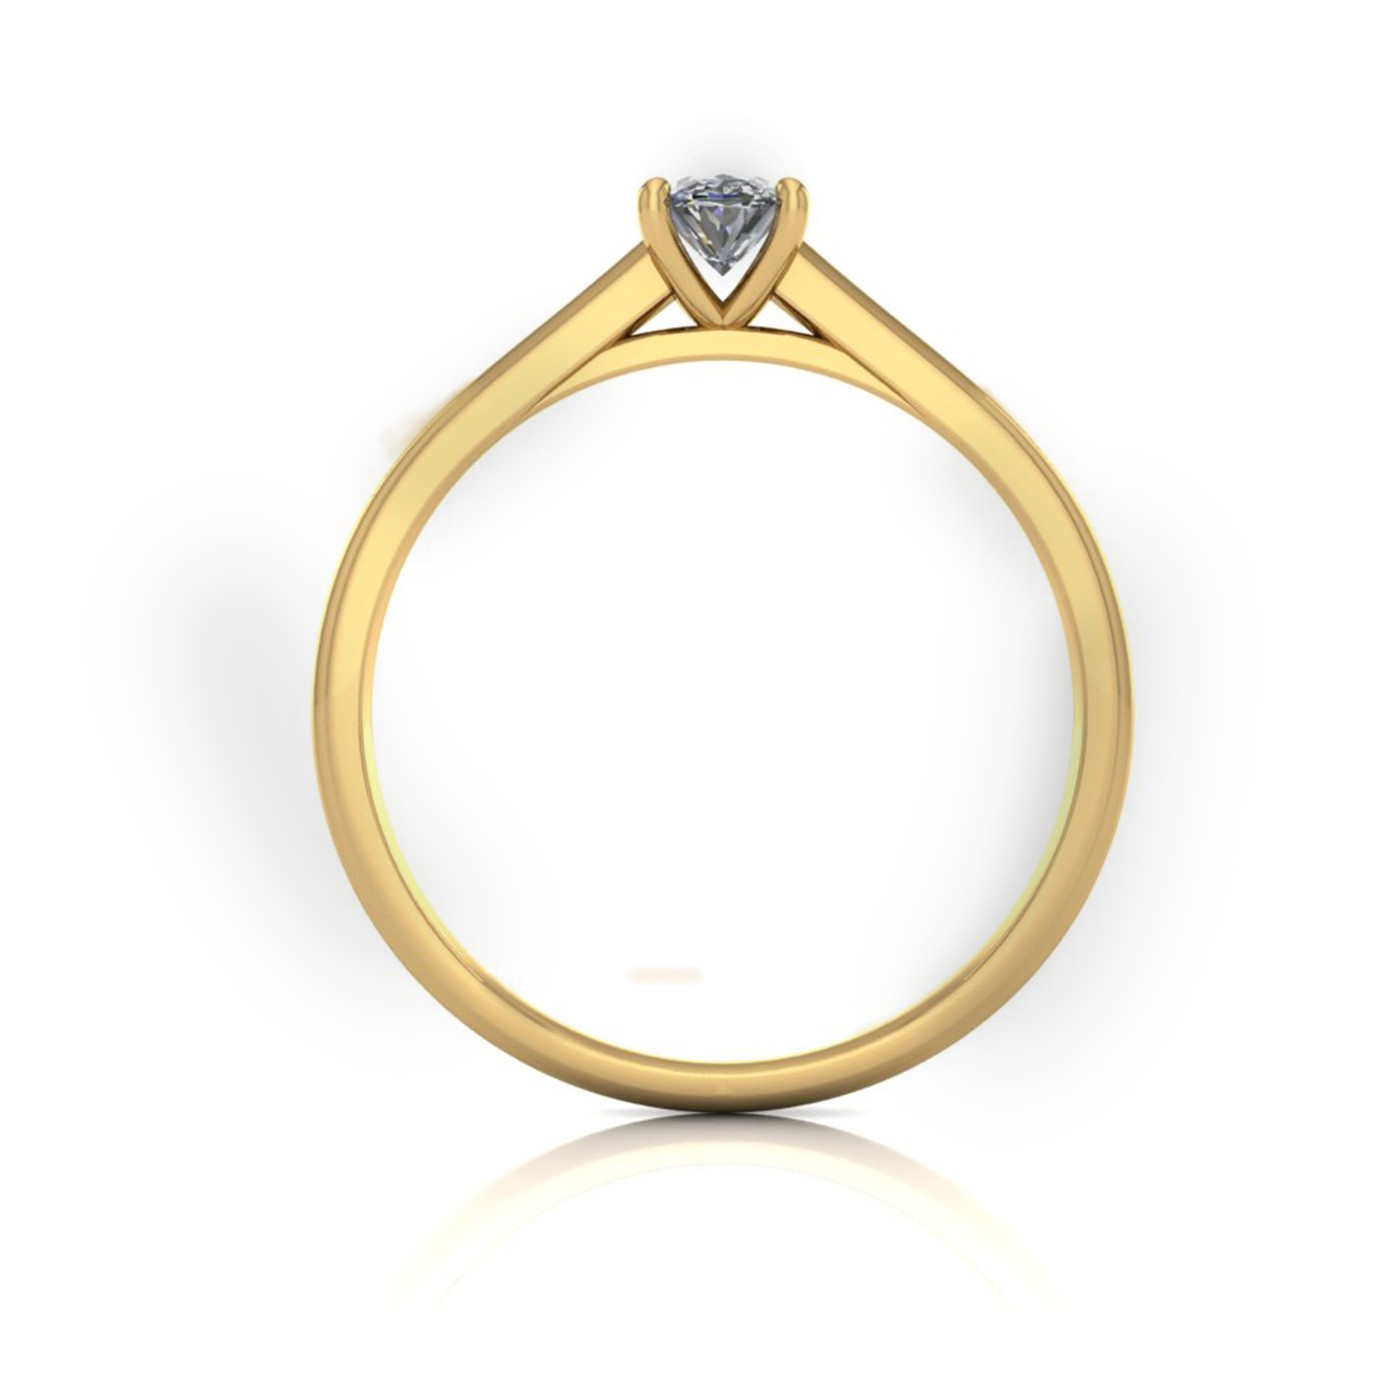 18k yellow gold  0,30 ct 4 prongs solitaire oval cut diamond engagement ring with whisper thin band